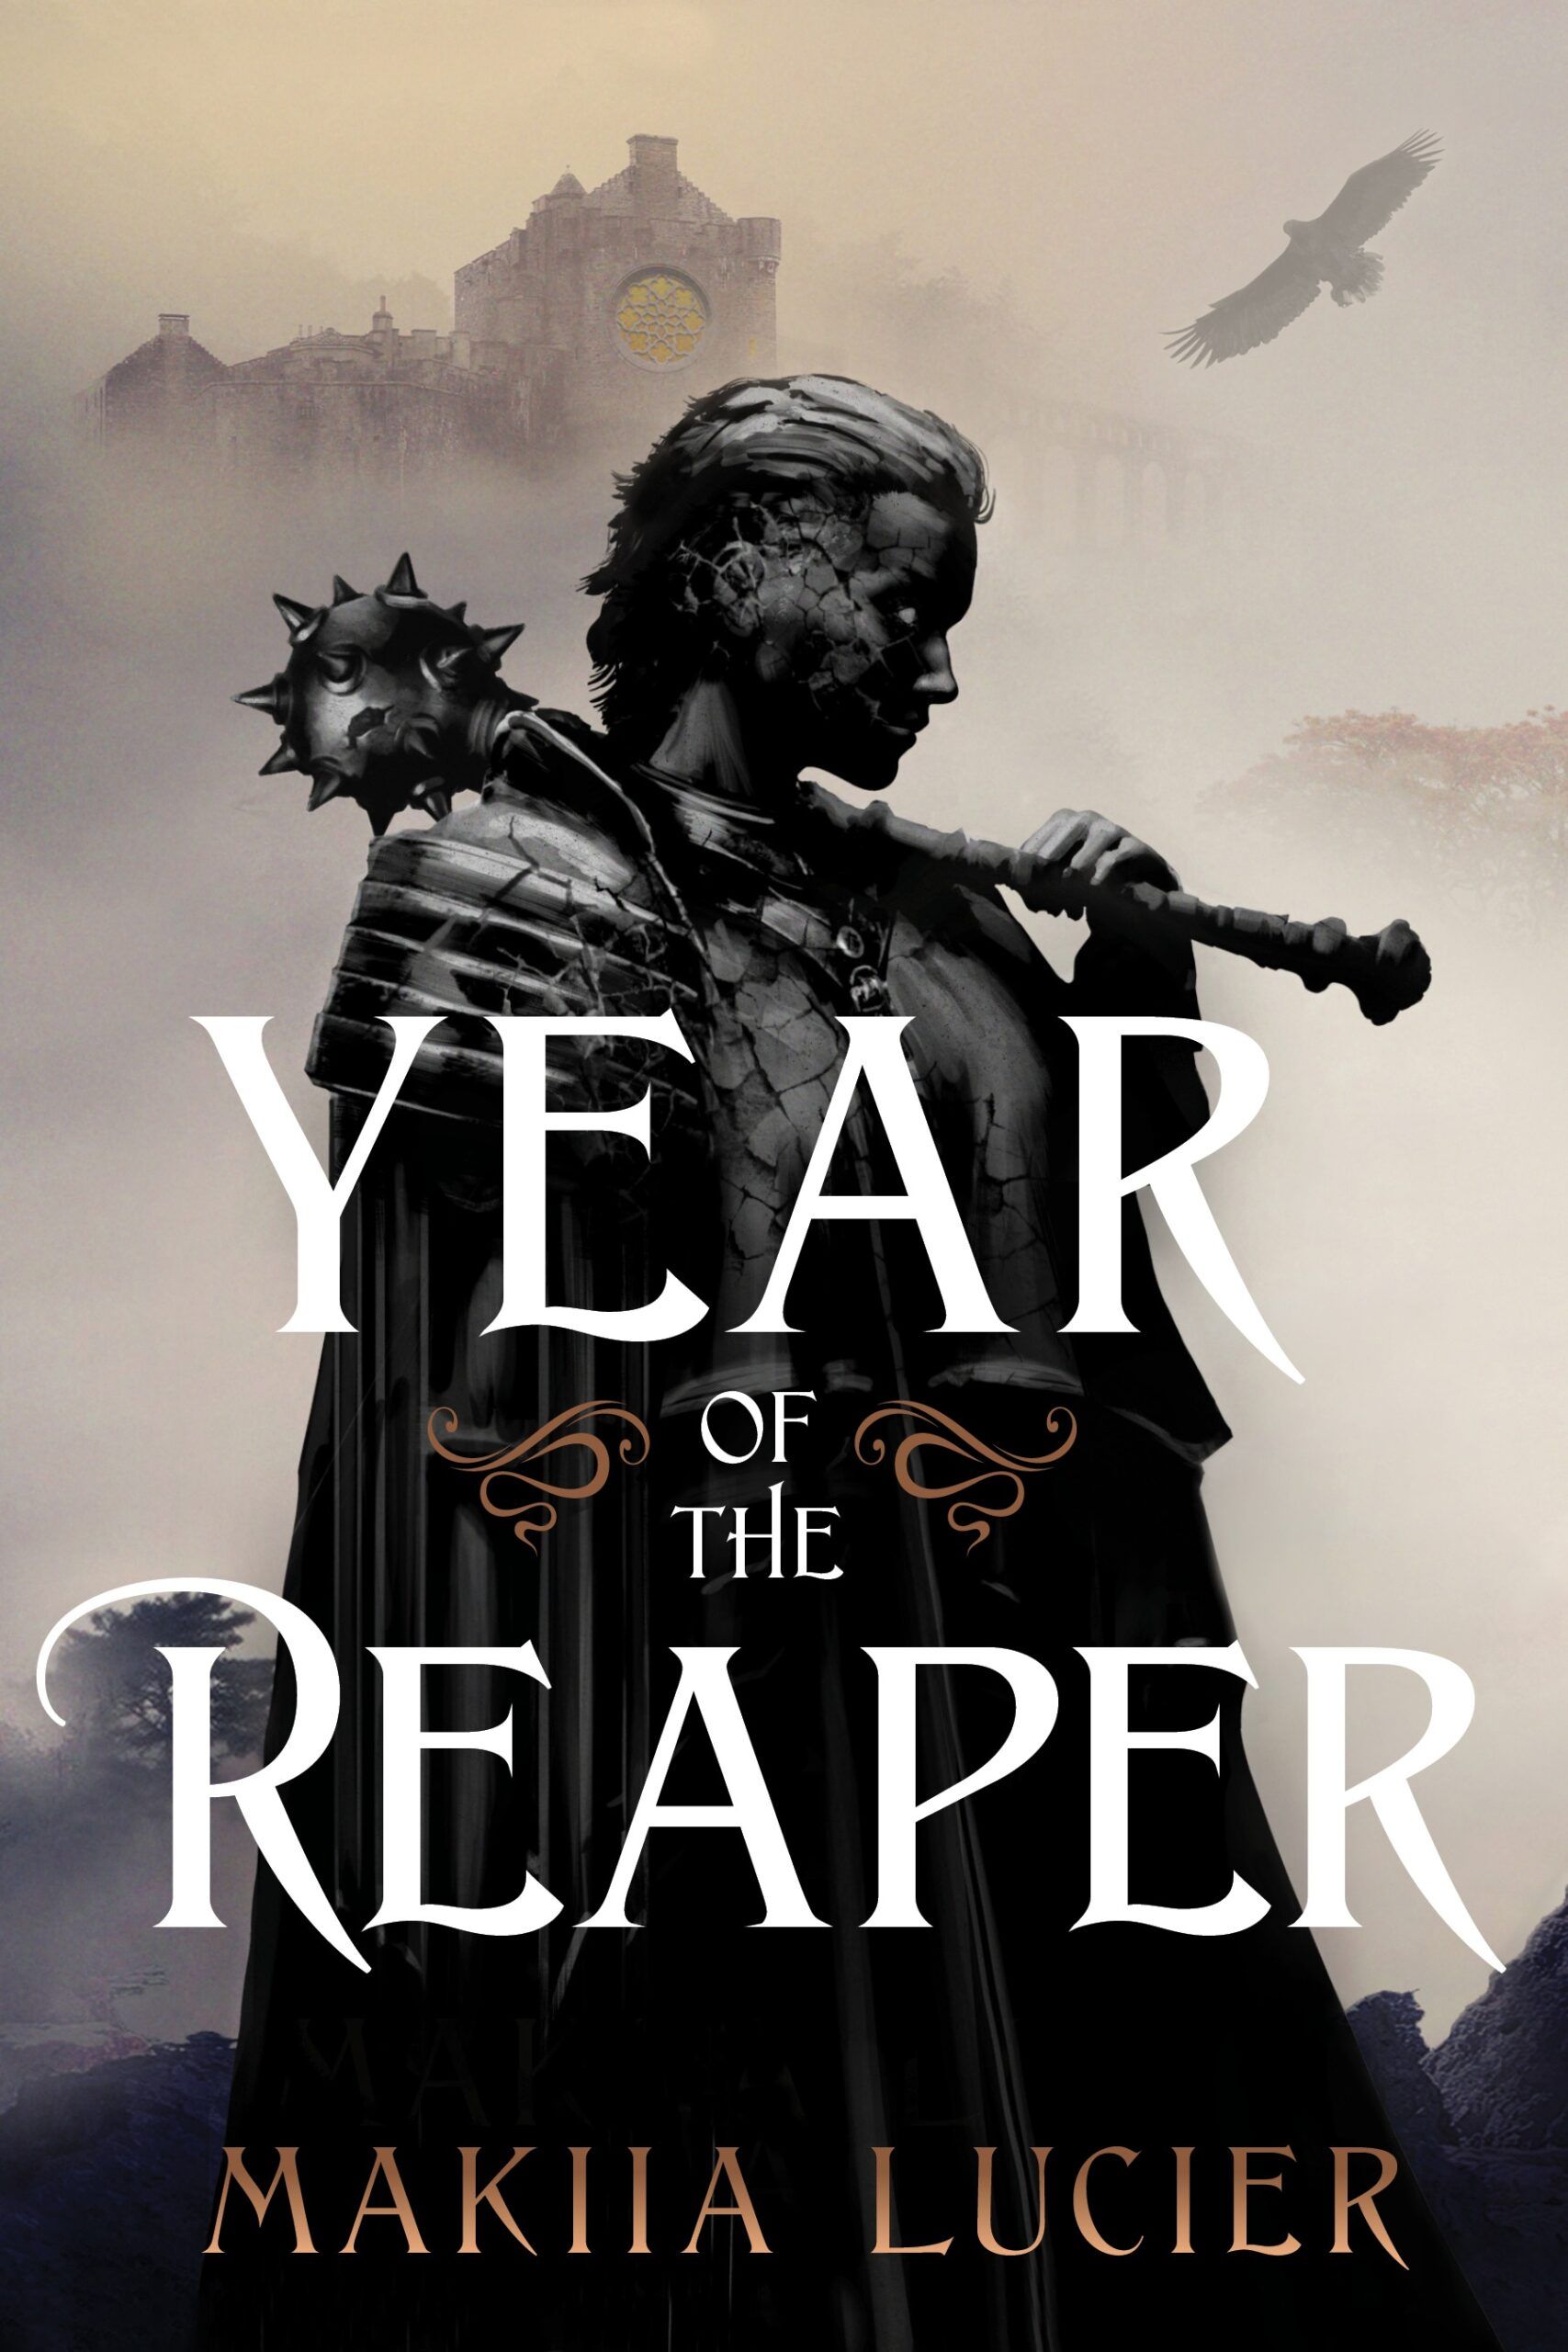 the cover of Year of the Reaper